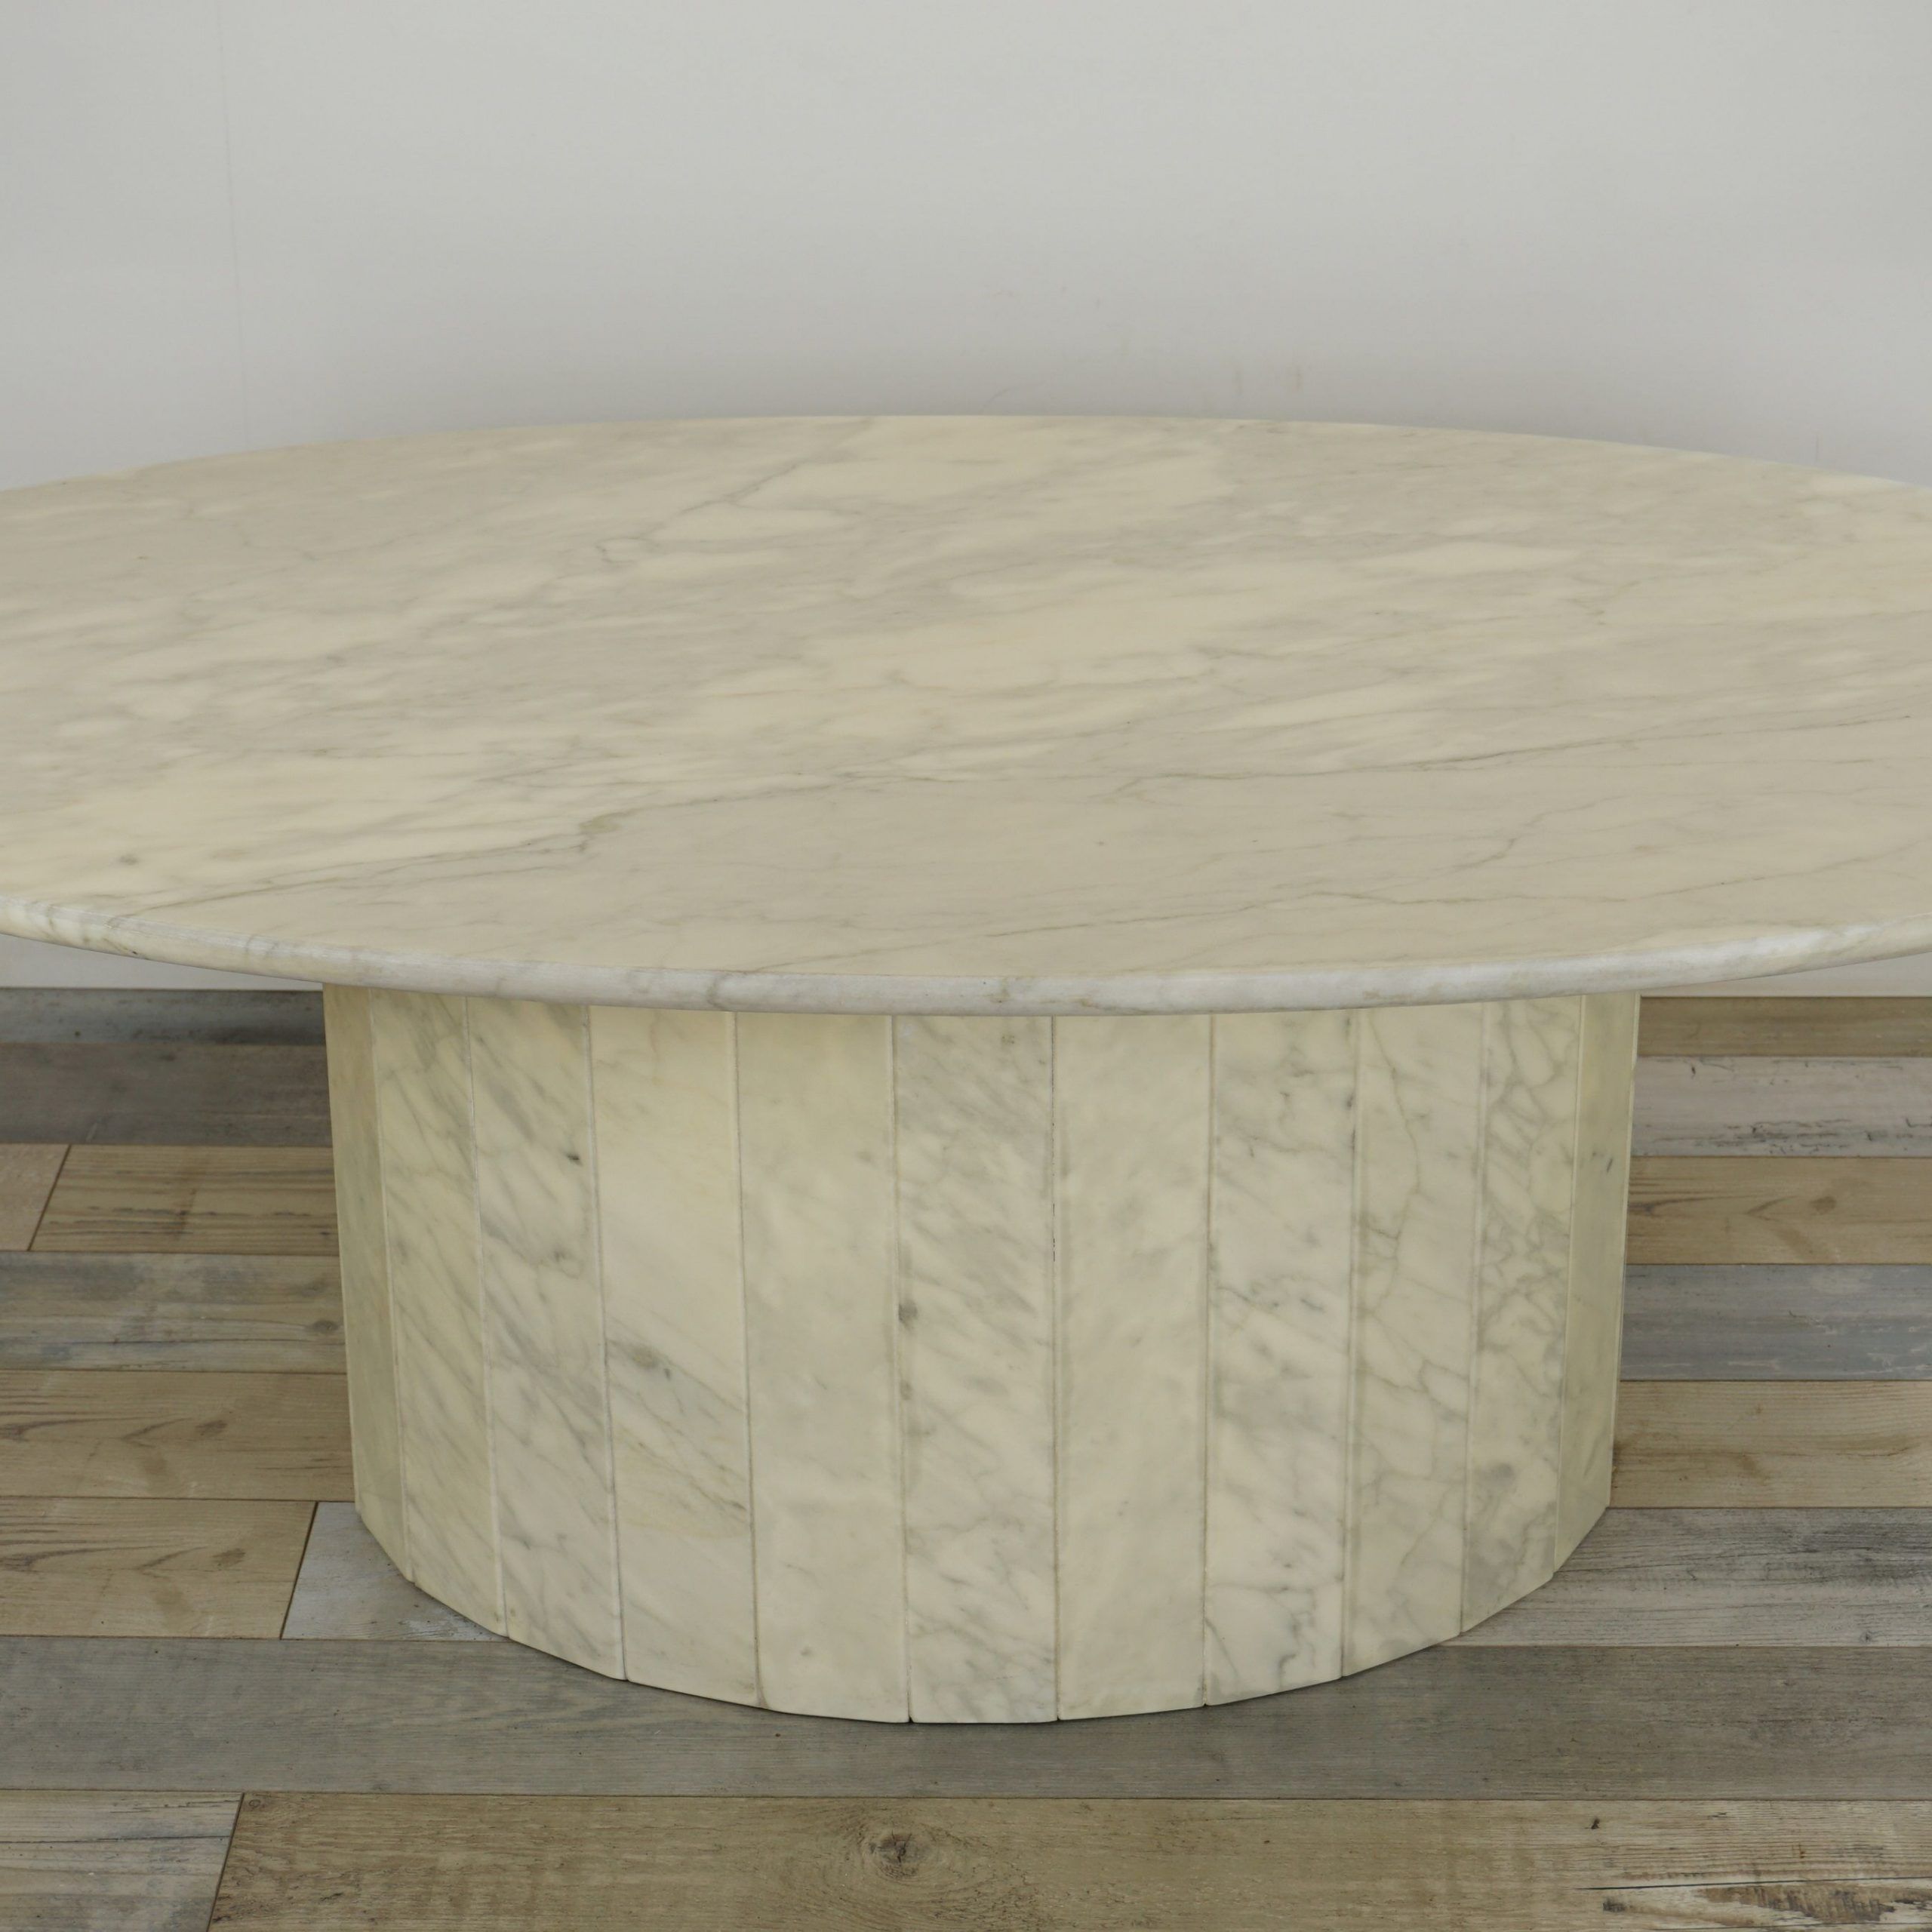 Most Recent Marble Coffee Tables Regarding Vintage Oval Marble Coffee Table 1970 – Design Market (View 8 of 10)